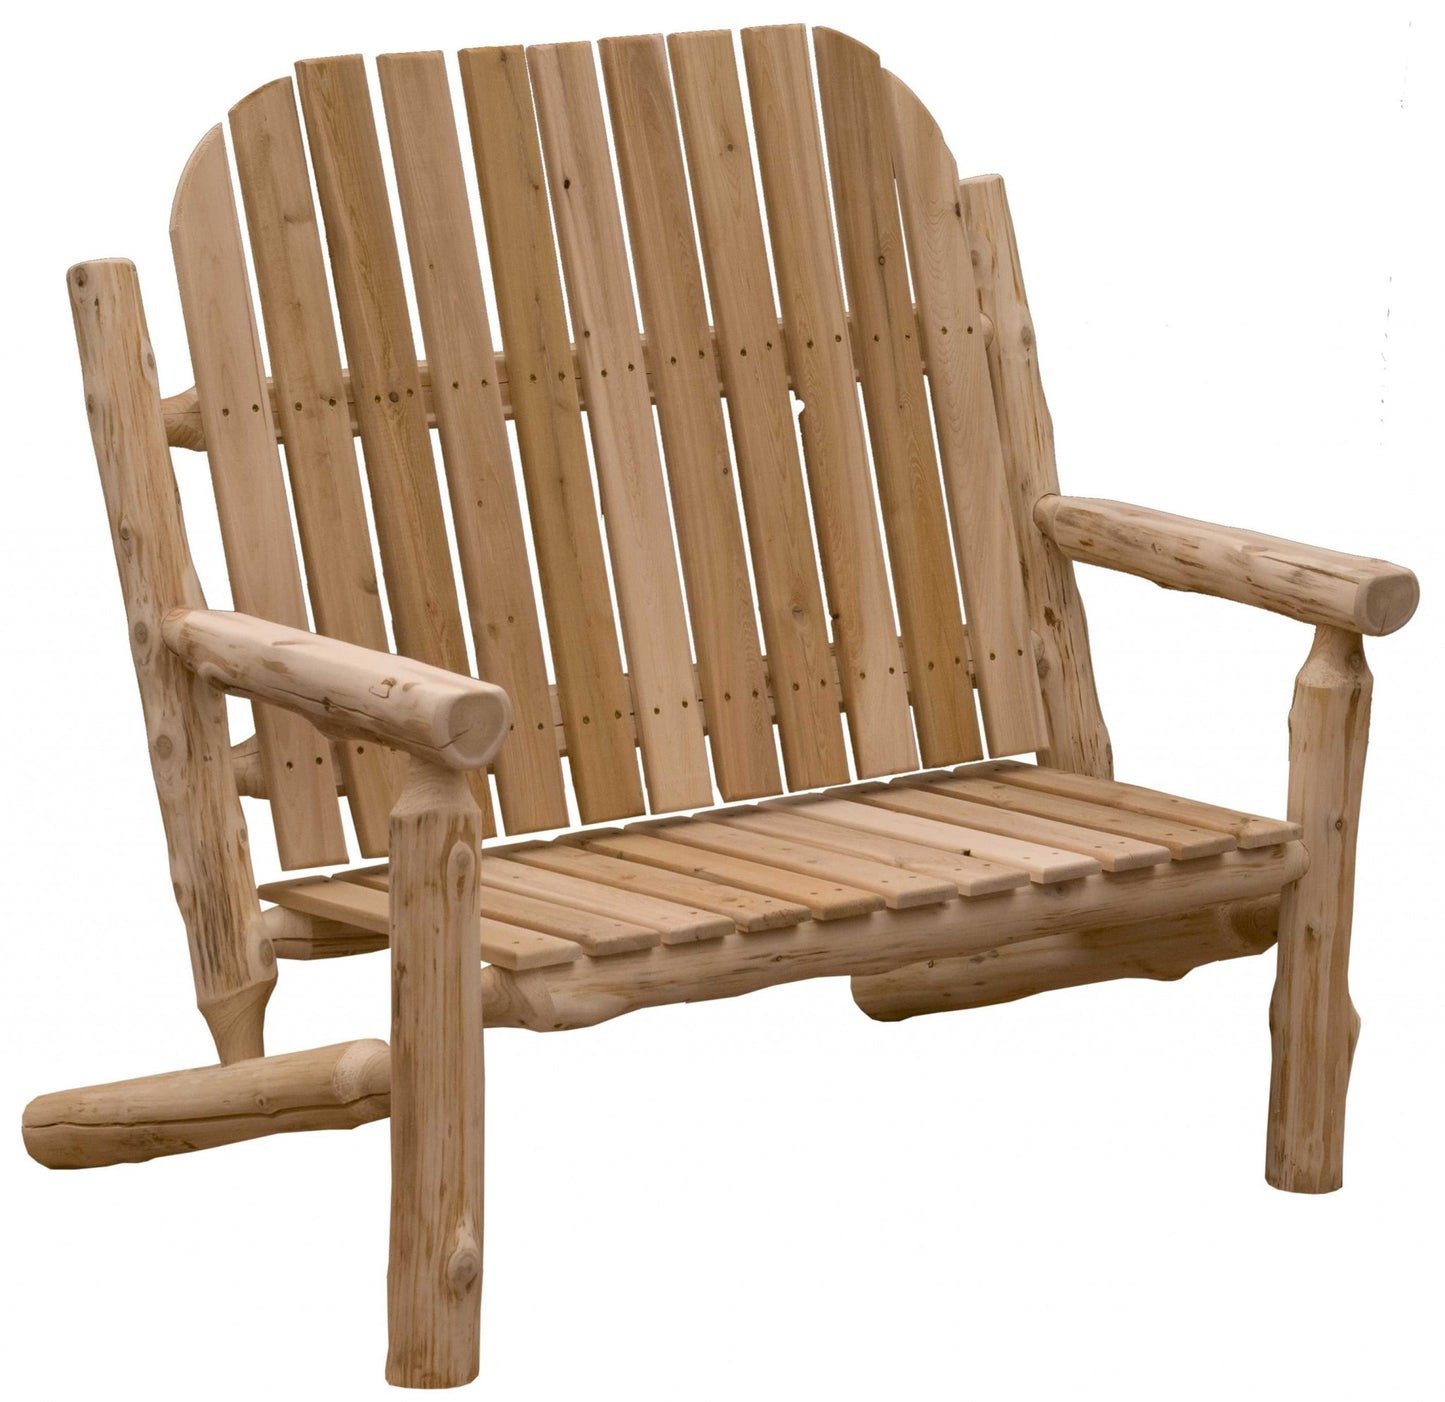 48" Natural Solid Wood Indoor Outdoor Arm Chair